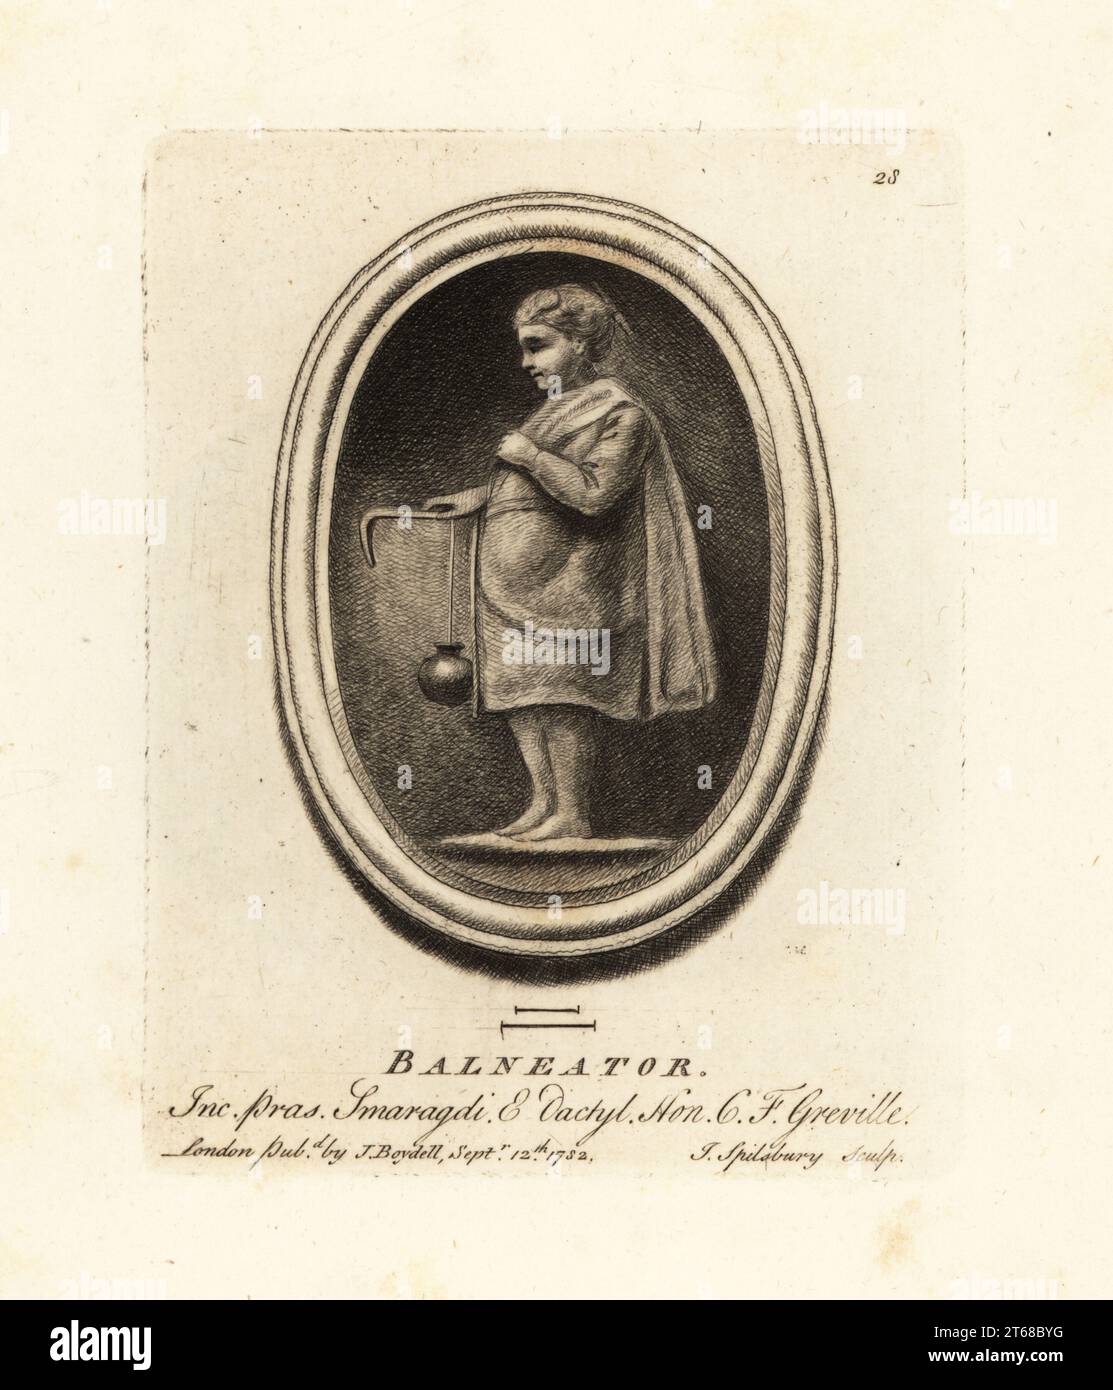 Roman bath attendant with jar of oil and strigil, a tool to scrape oil from the skin. Engraved in emerald and dactylotheca from the collection of antiquarian Charles Francis Greville. Balneator inc. pras. Smaragdi & Dactyl. Mezzotint copperplate engraving by John Spilsbury from his Collection of Fifty Prints from Antique Gems, John Boydell, London, 1785. Stock Photo